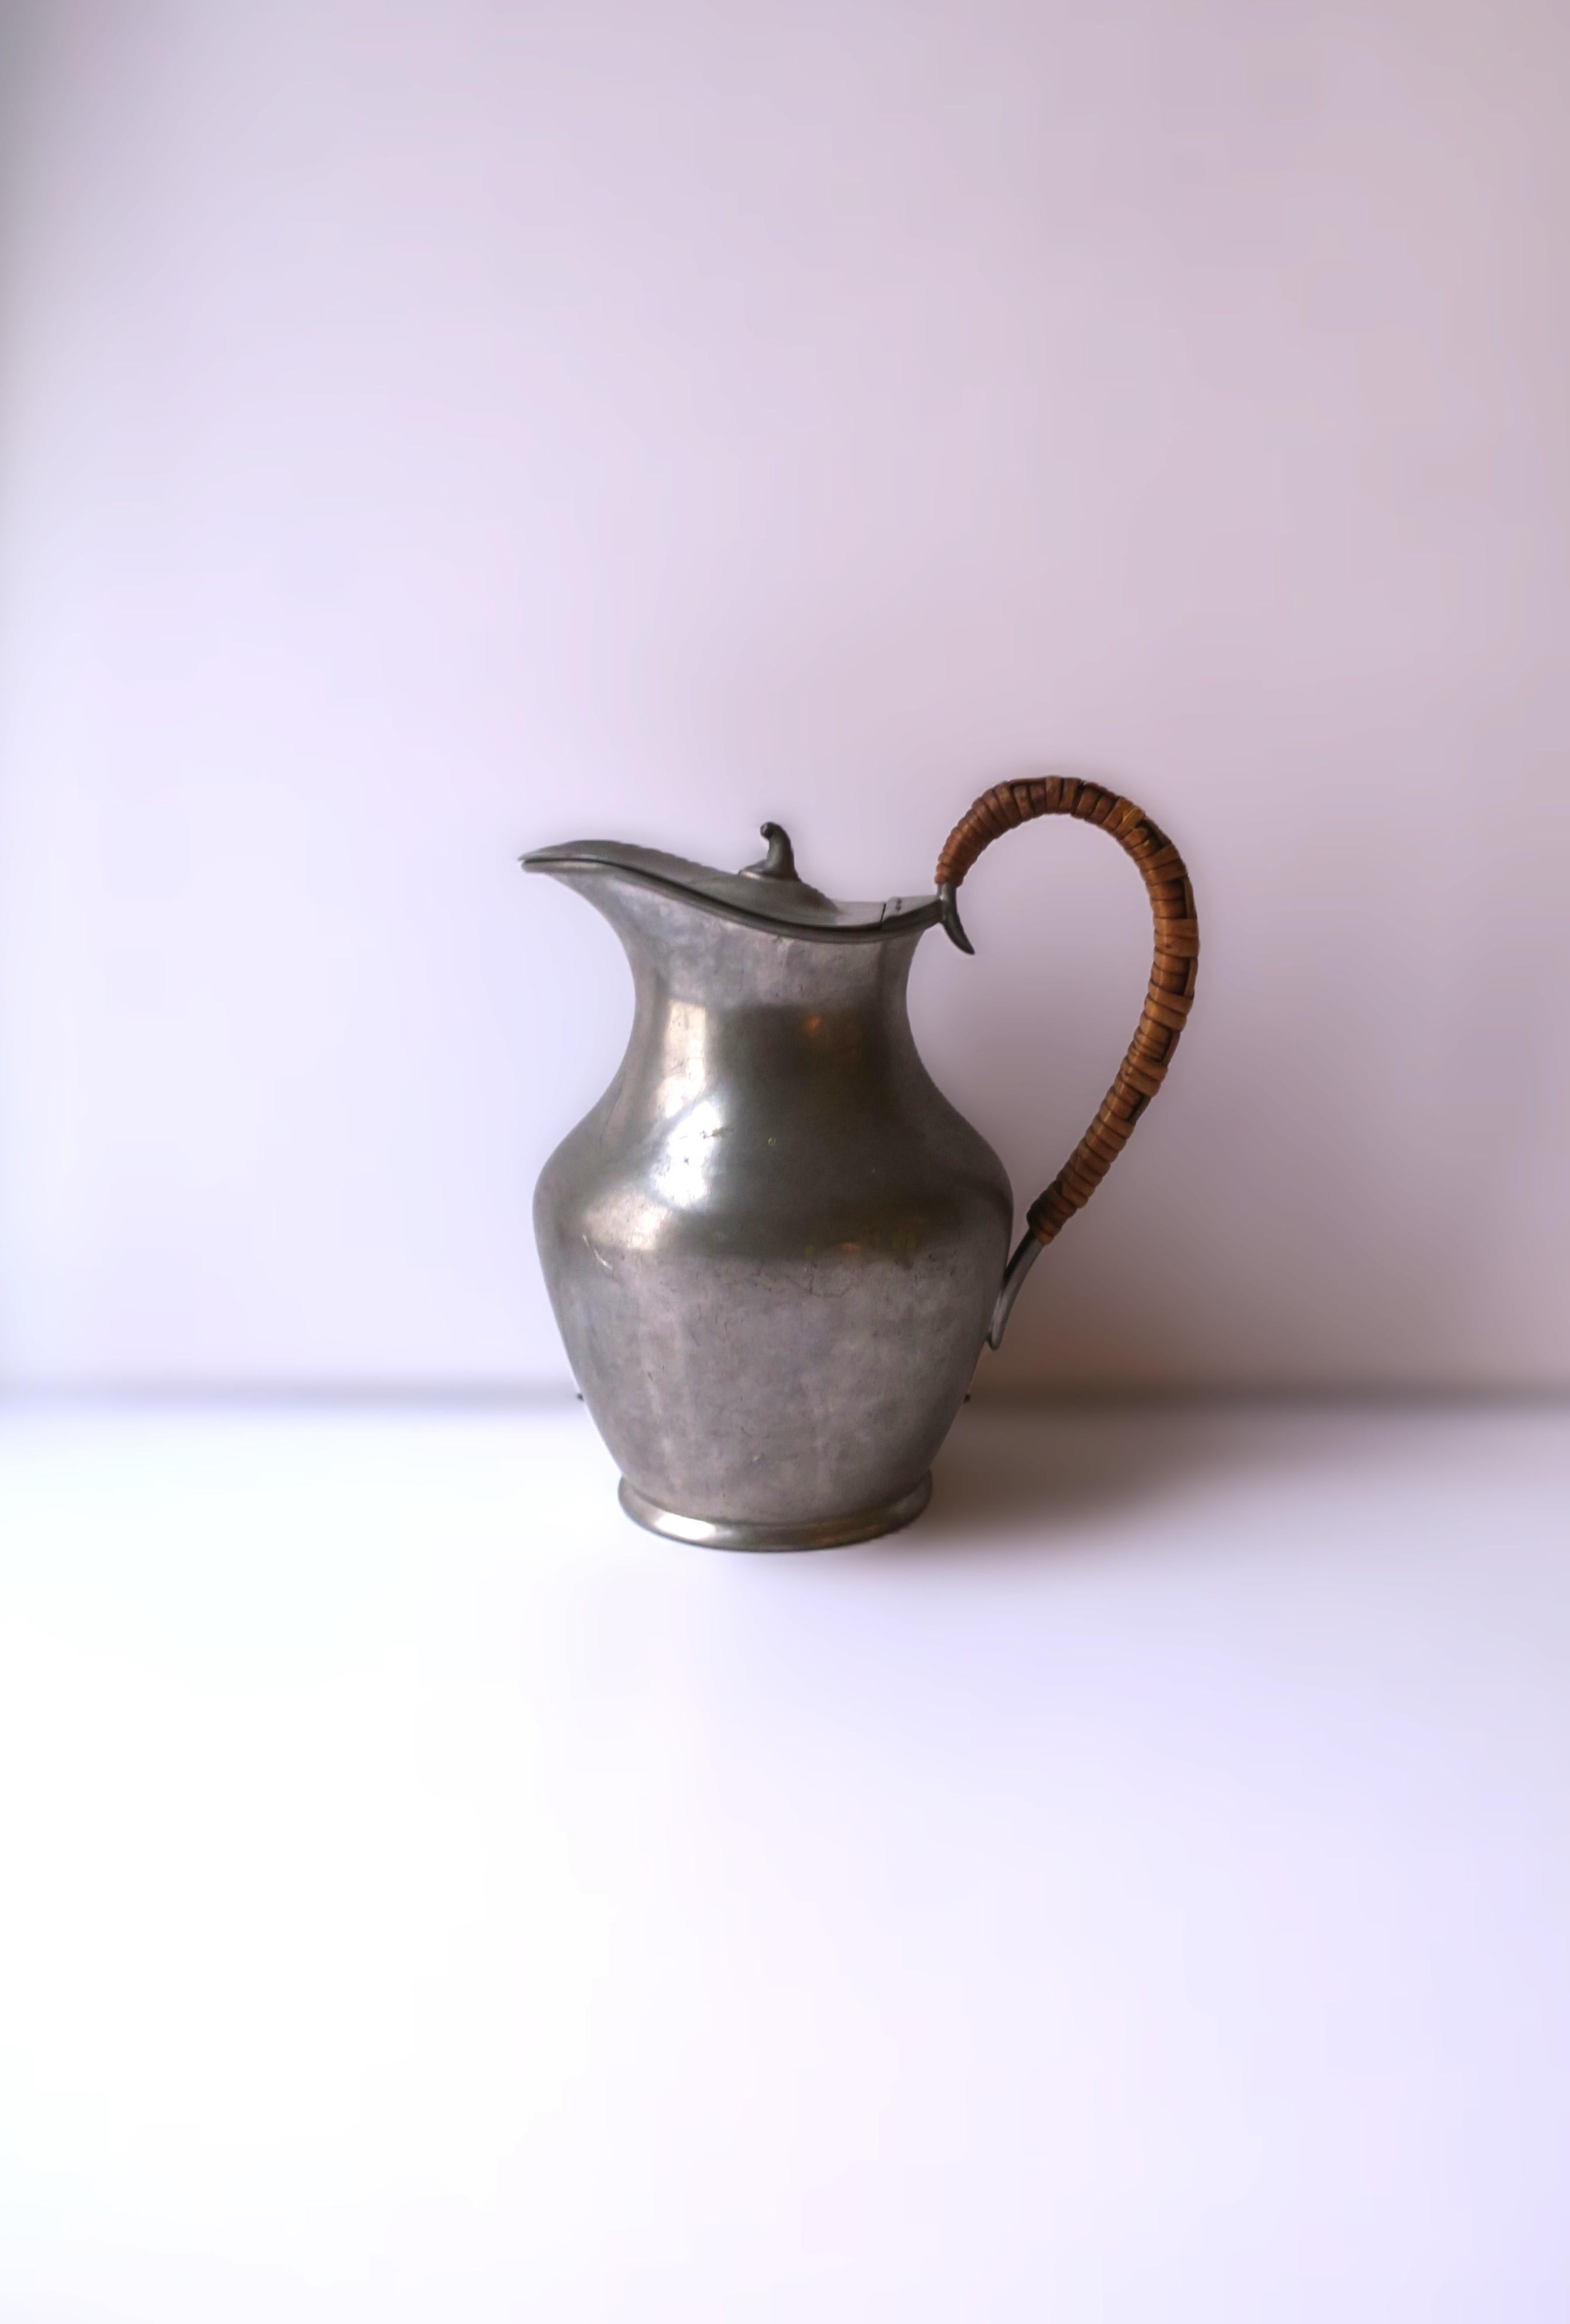 An English Sheffield pewter pitcher with flip-black lid and wicker handle, circa early-20th century, England. With markers' mark and origin on bottom underside as shown in last images. A great piece for a kitchen shelf, cabinet, table, etc.